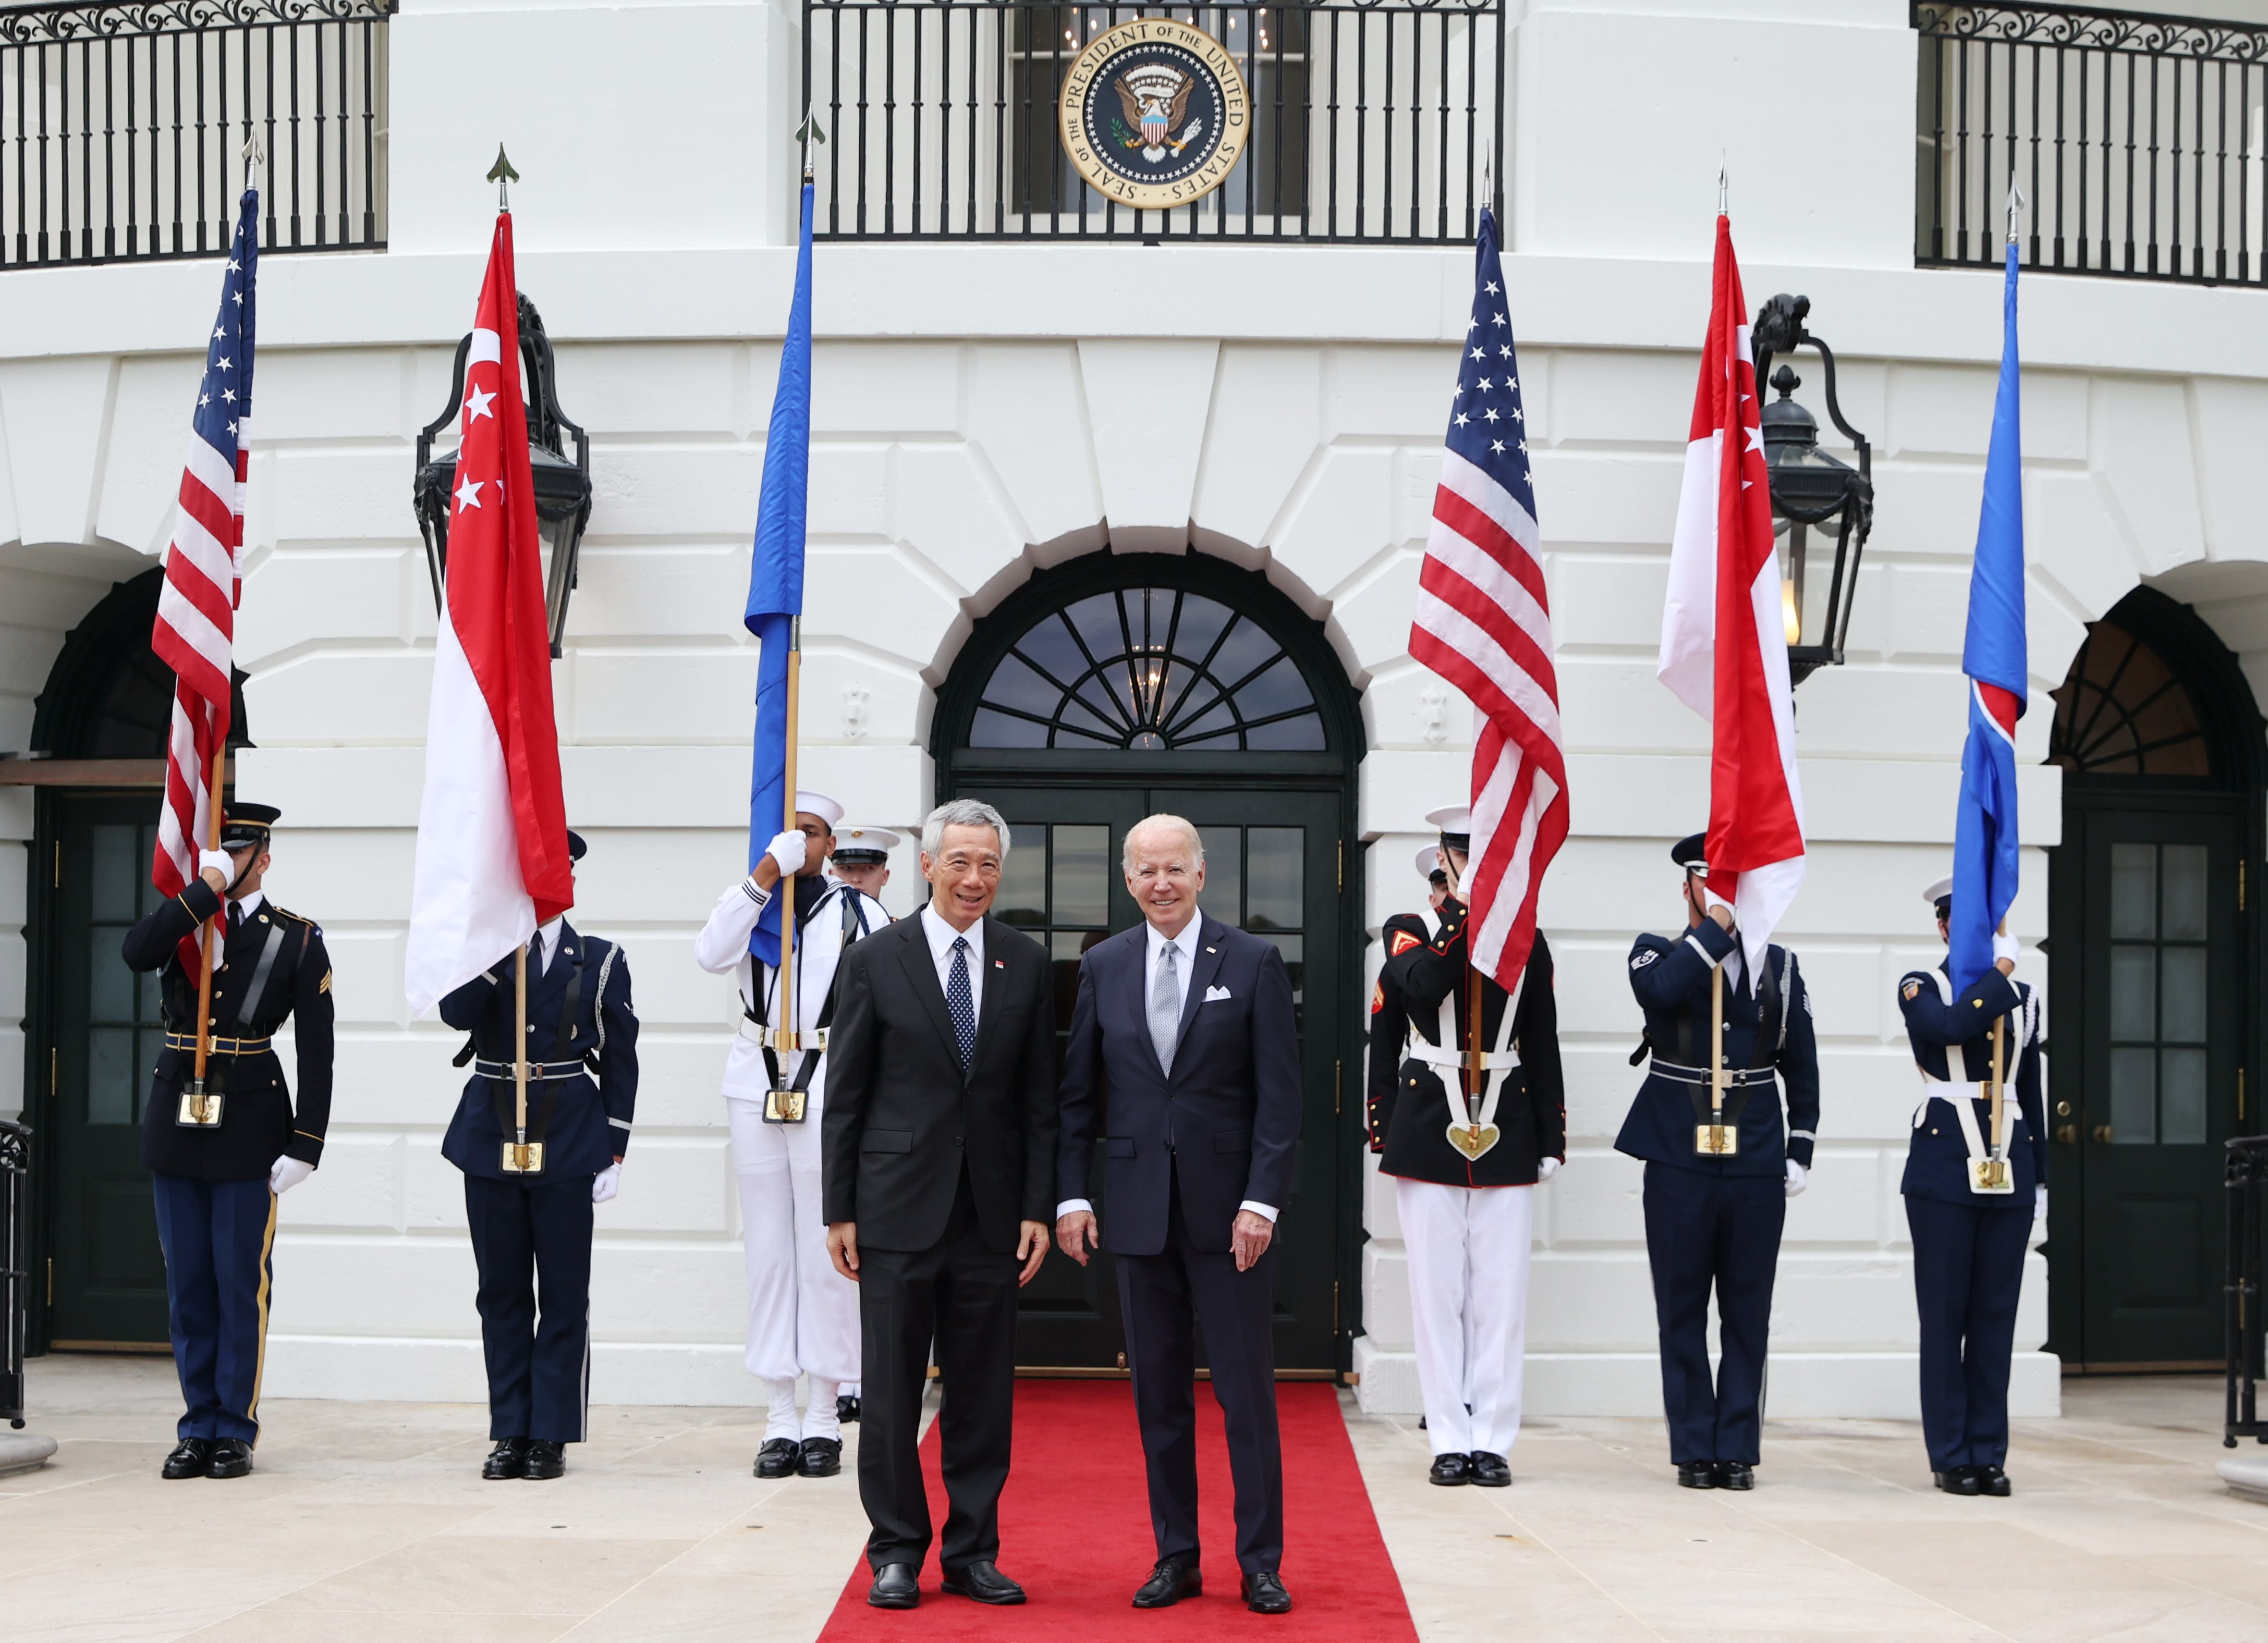 Prime Minister Lee Hsien Loong (left) with US President Joe Biden at the White House on May 12, 2022.